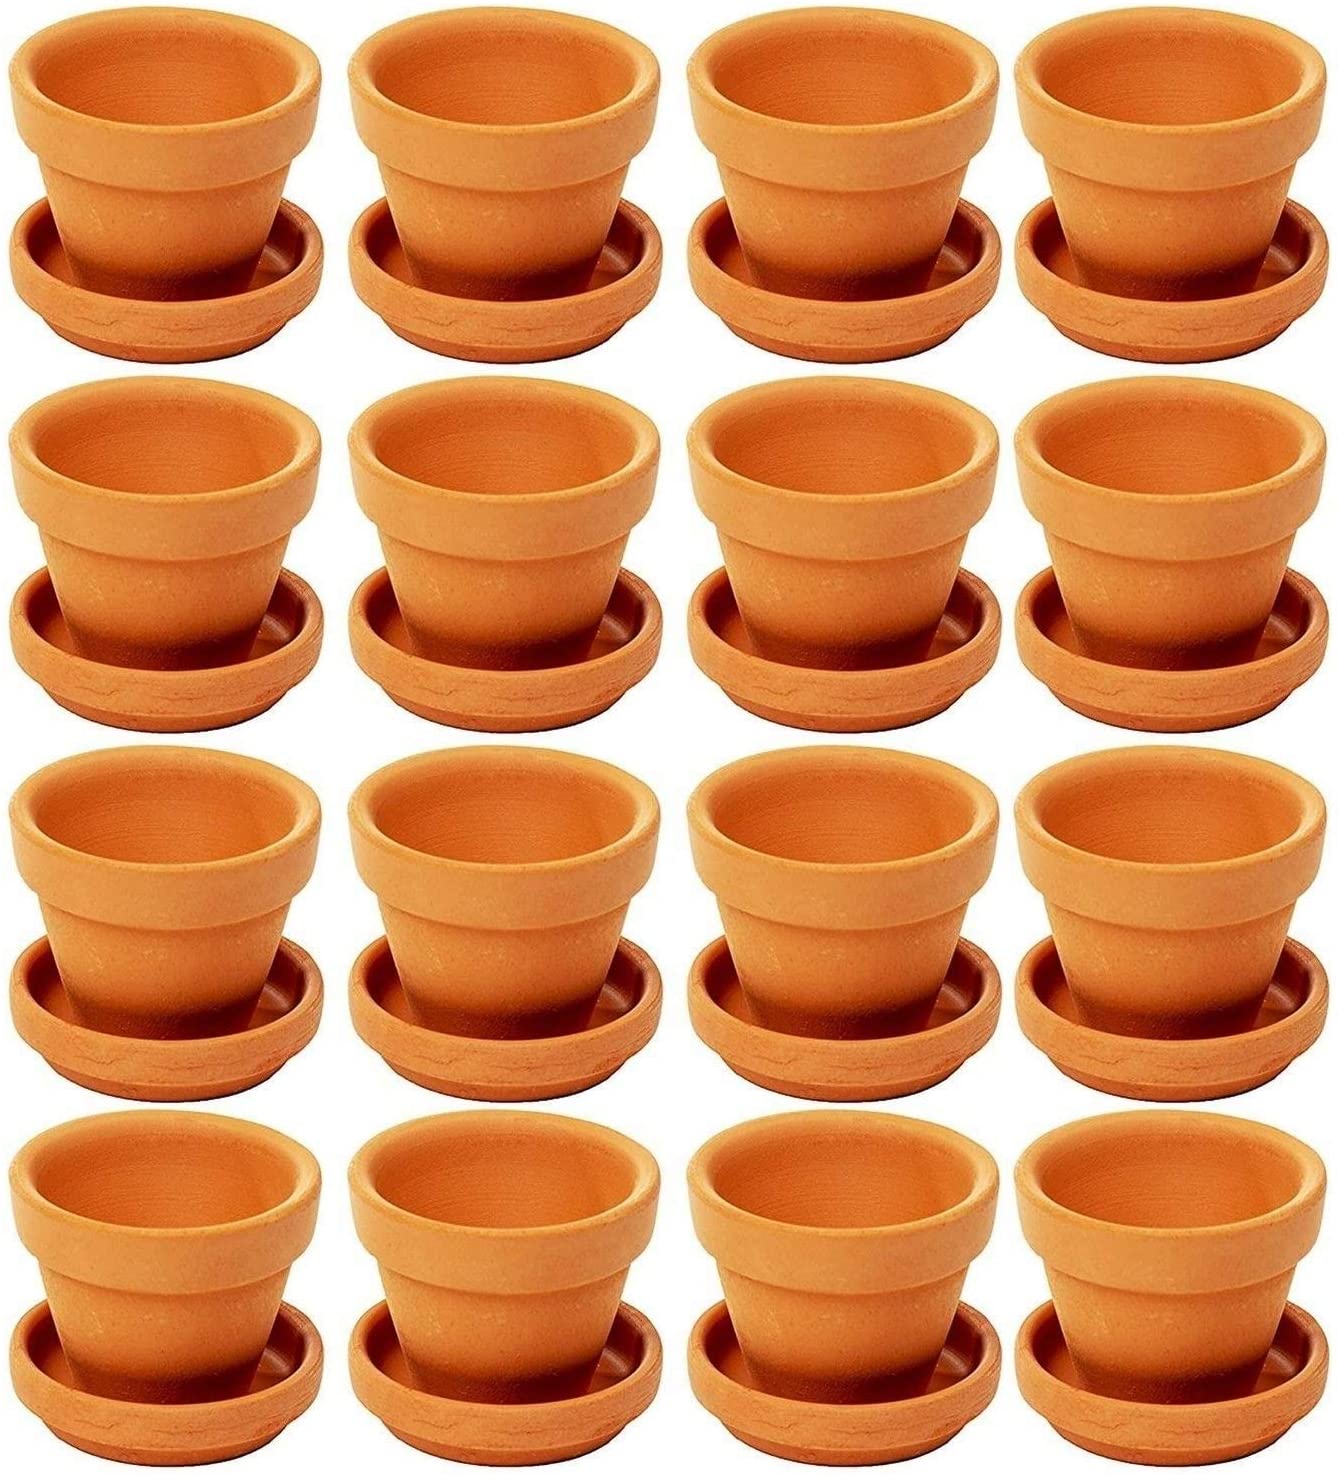 MISC Pots Saucer 16 Pack Clay Flower Saucers Brown